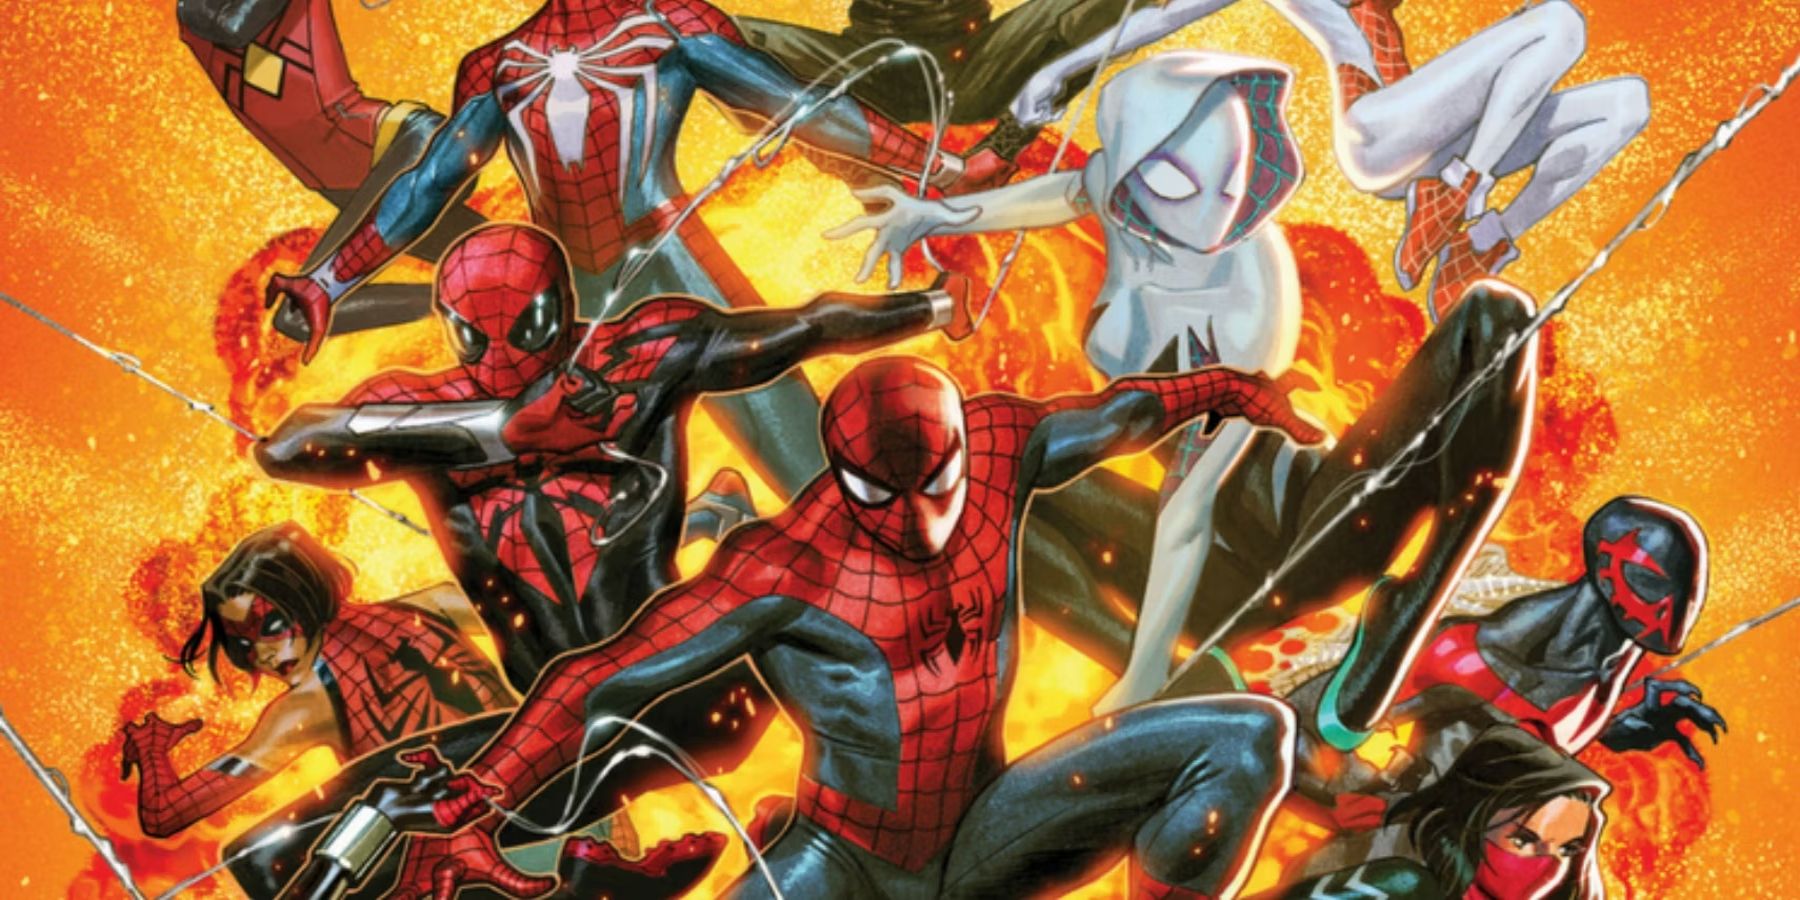 Multiple variants of Spider-characters, in many different costumes, lunging forward against a backdrop of flames.